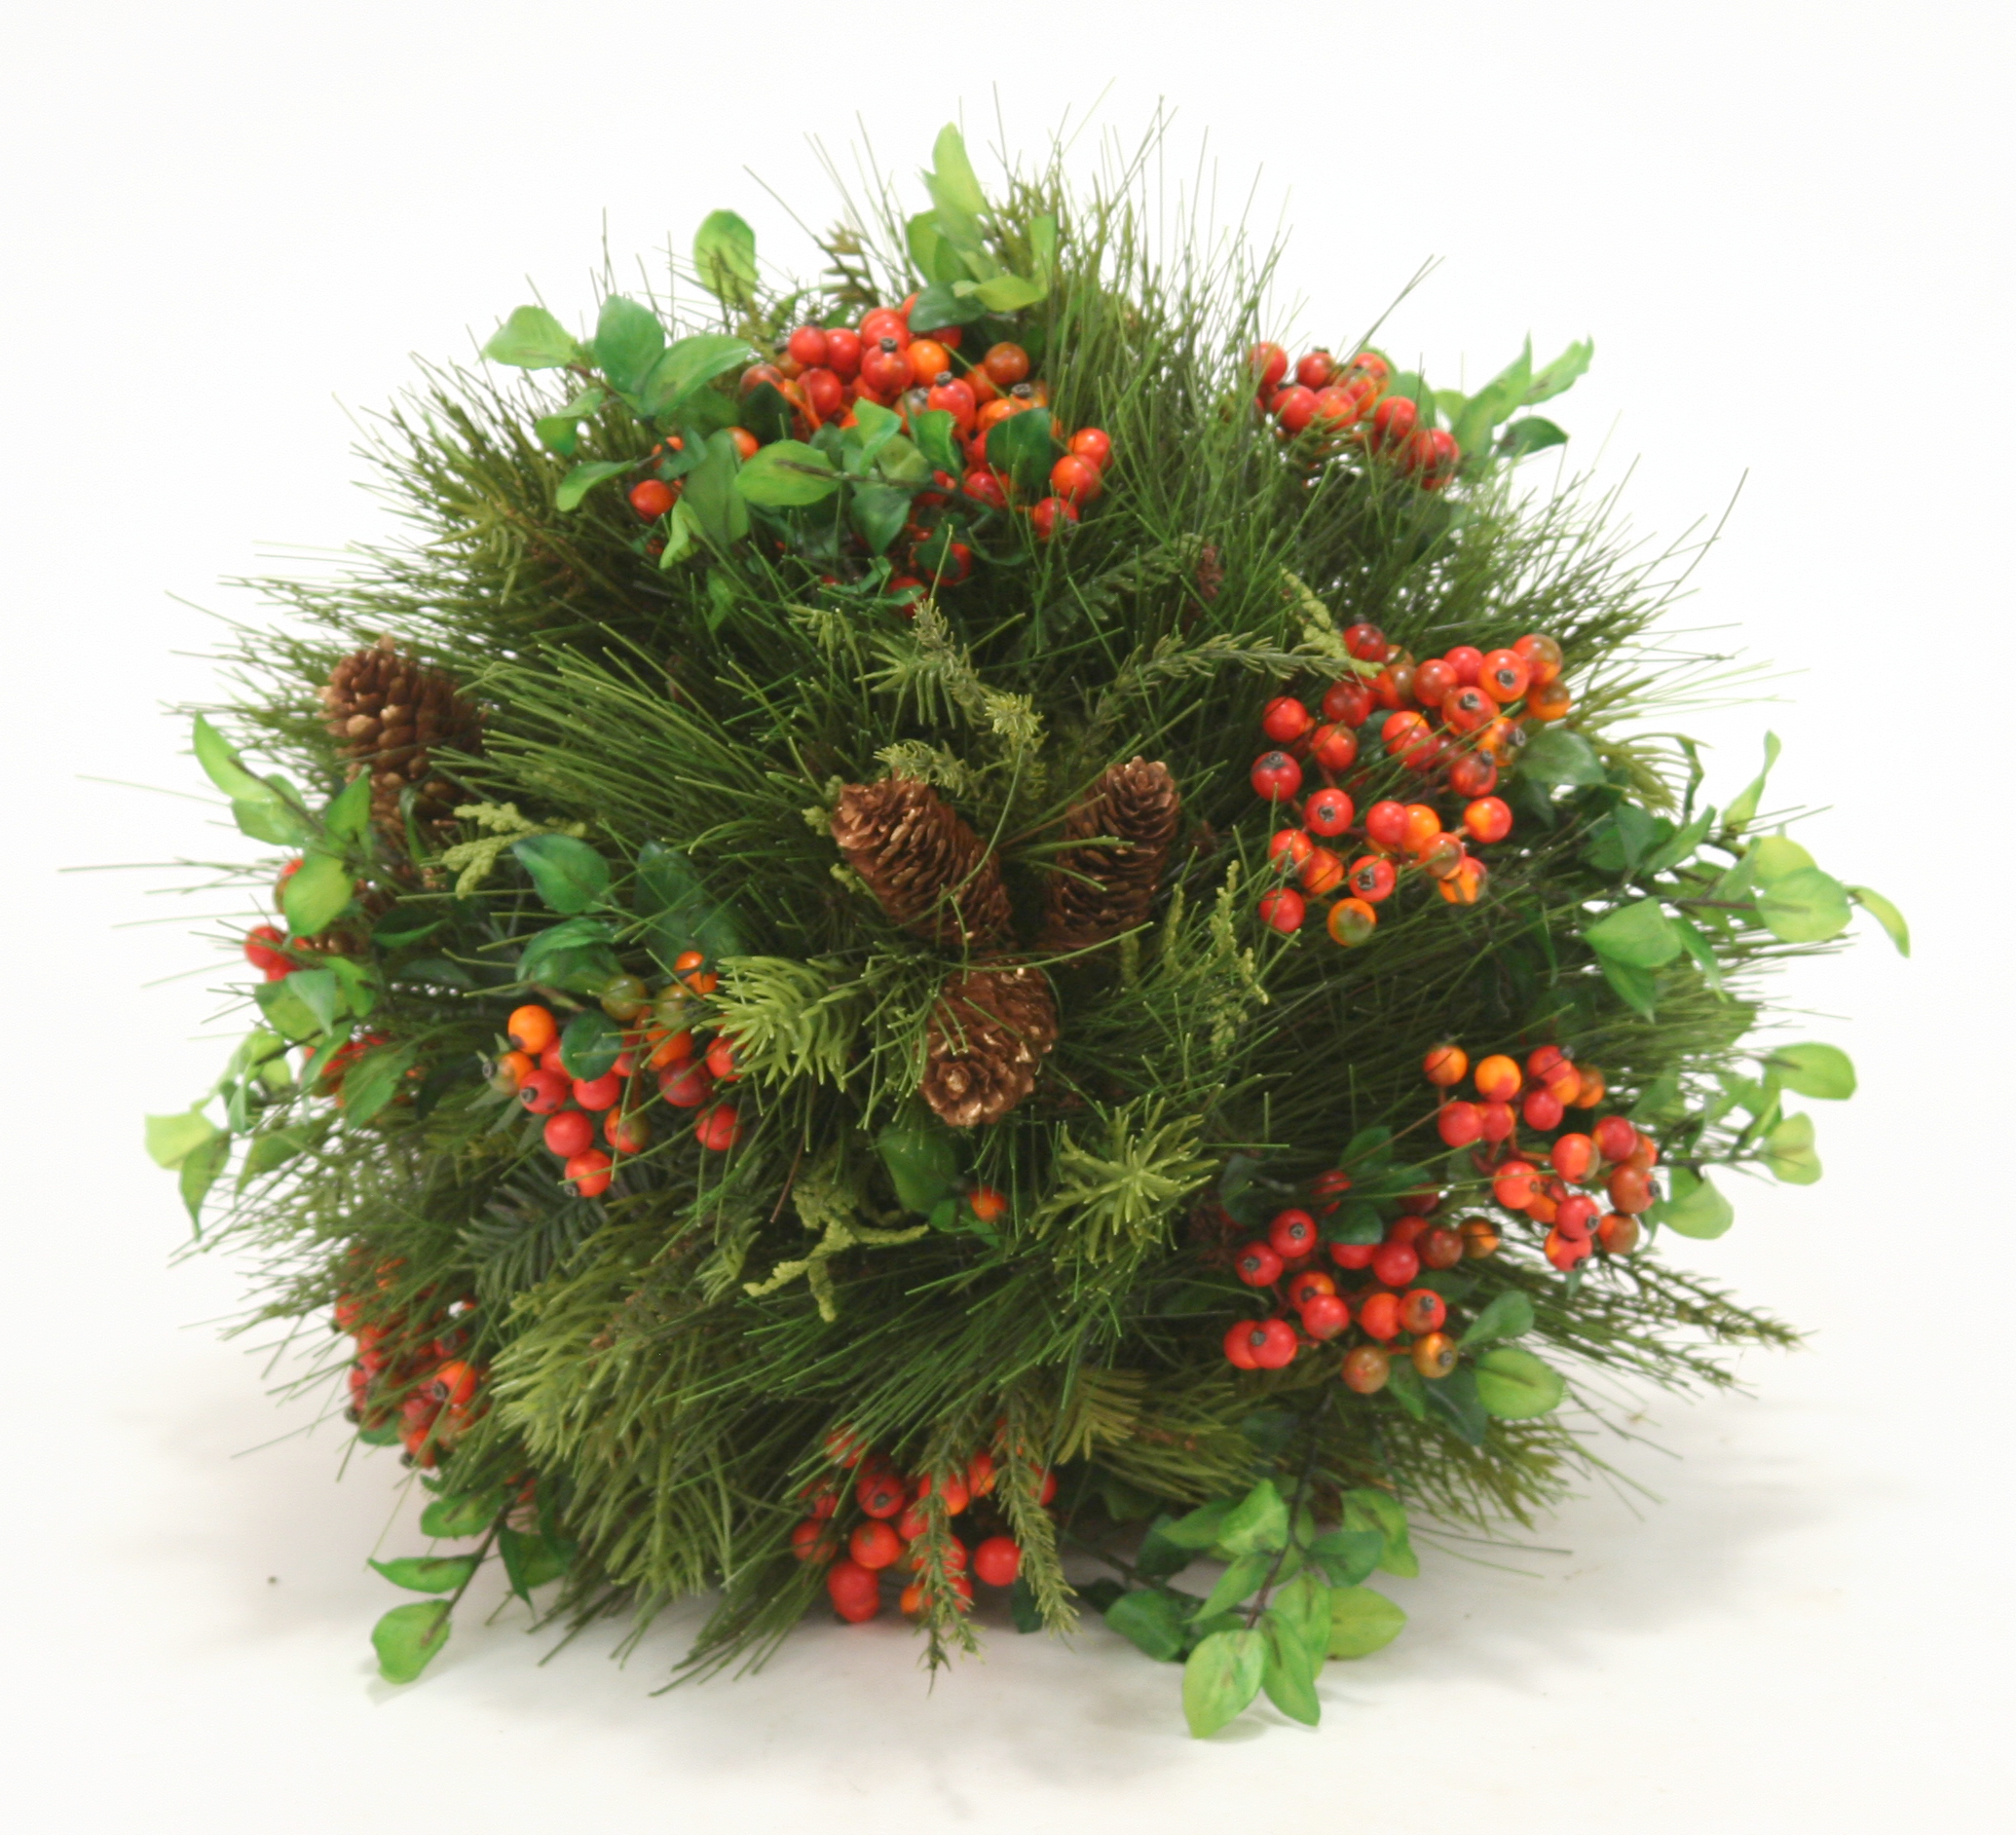 Mixed Pine Ball with Berry Spray's and Pine Cones